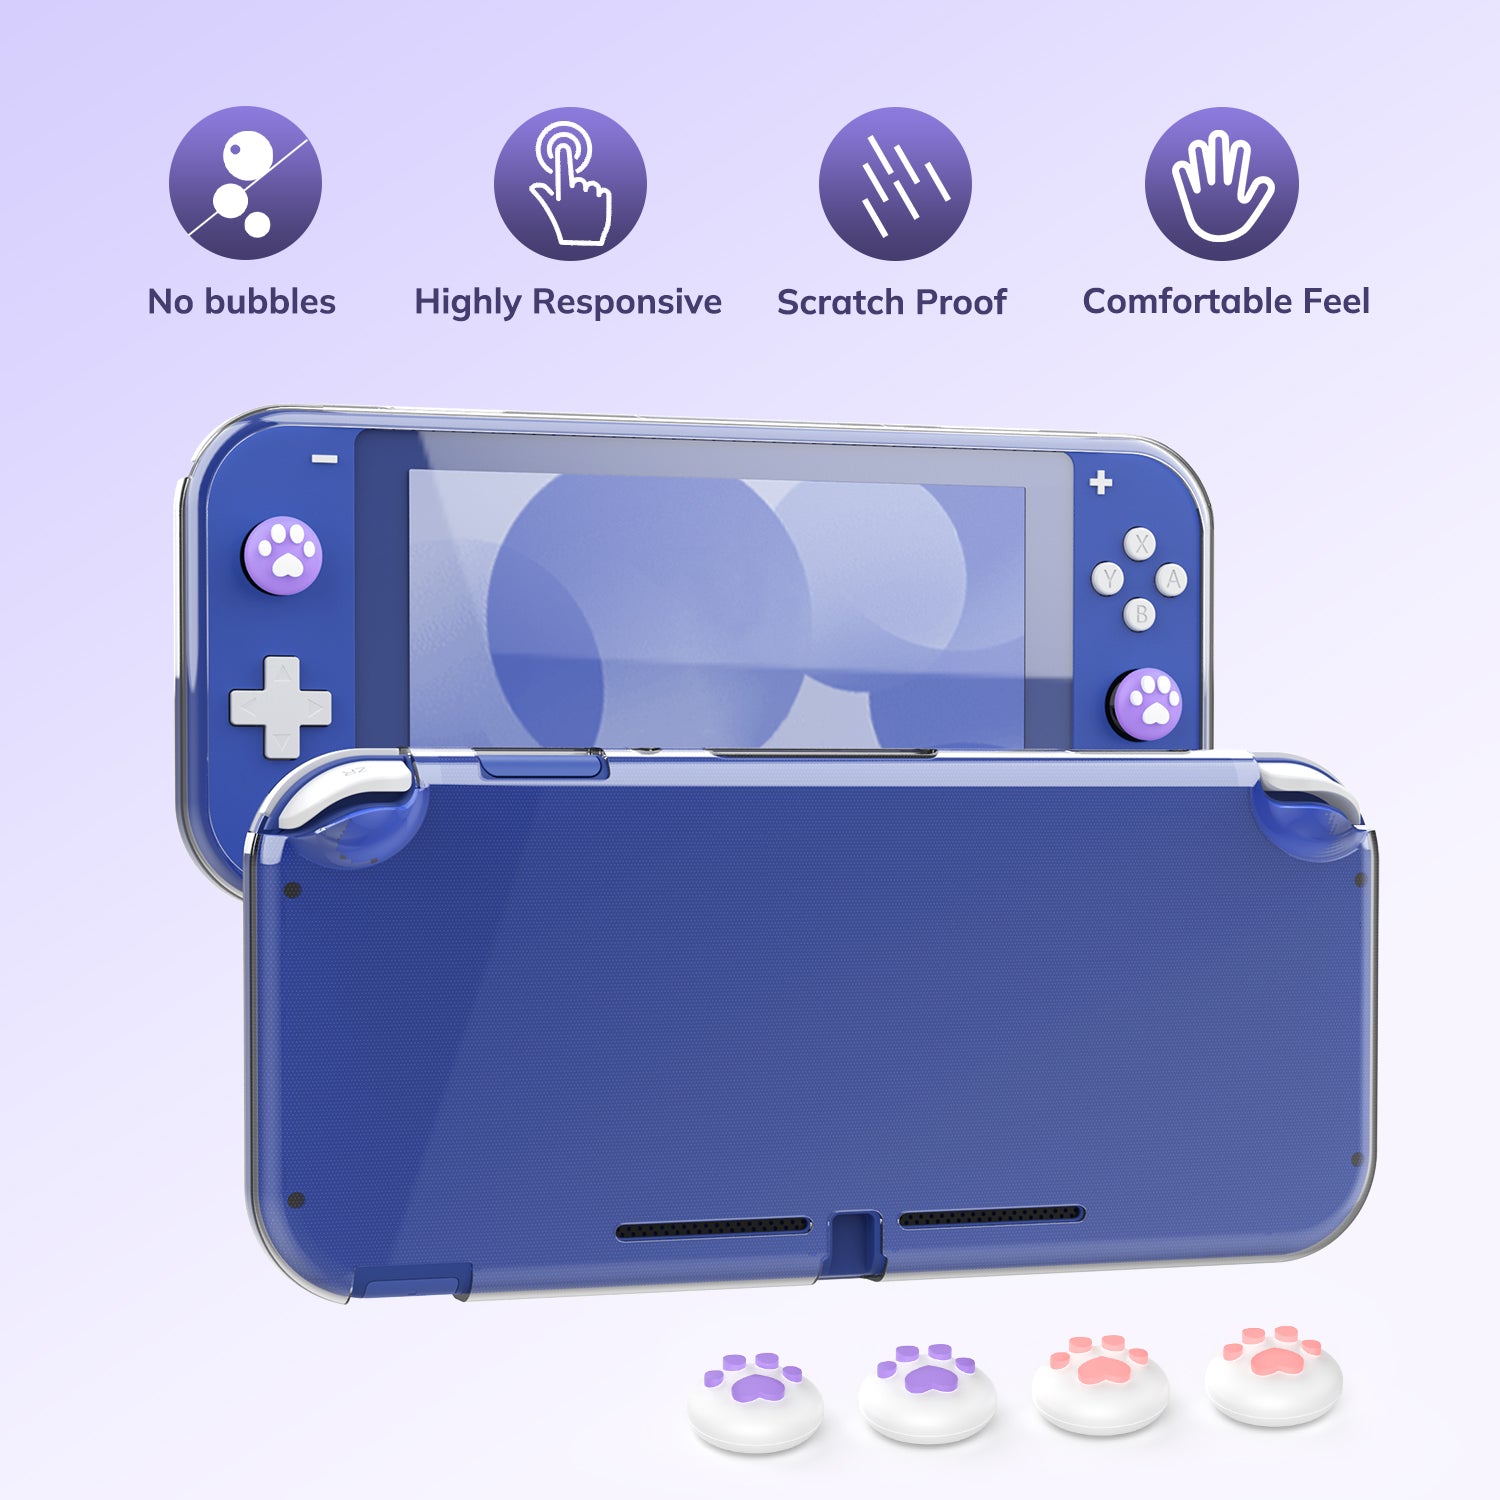 Younik Switch Lite Protective Case, Carrying Case for Switch Lite